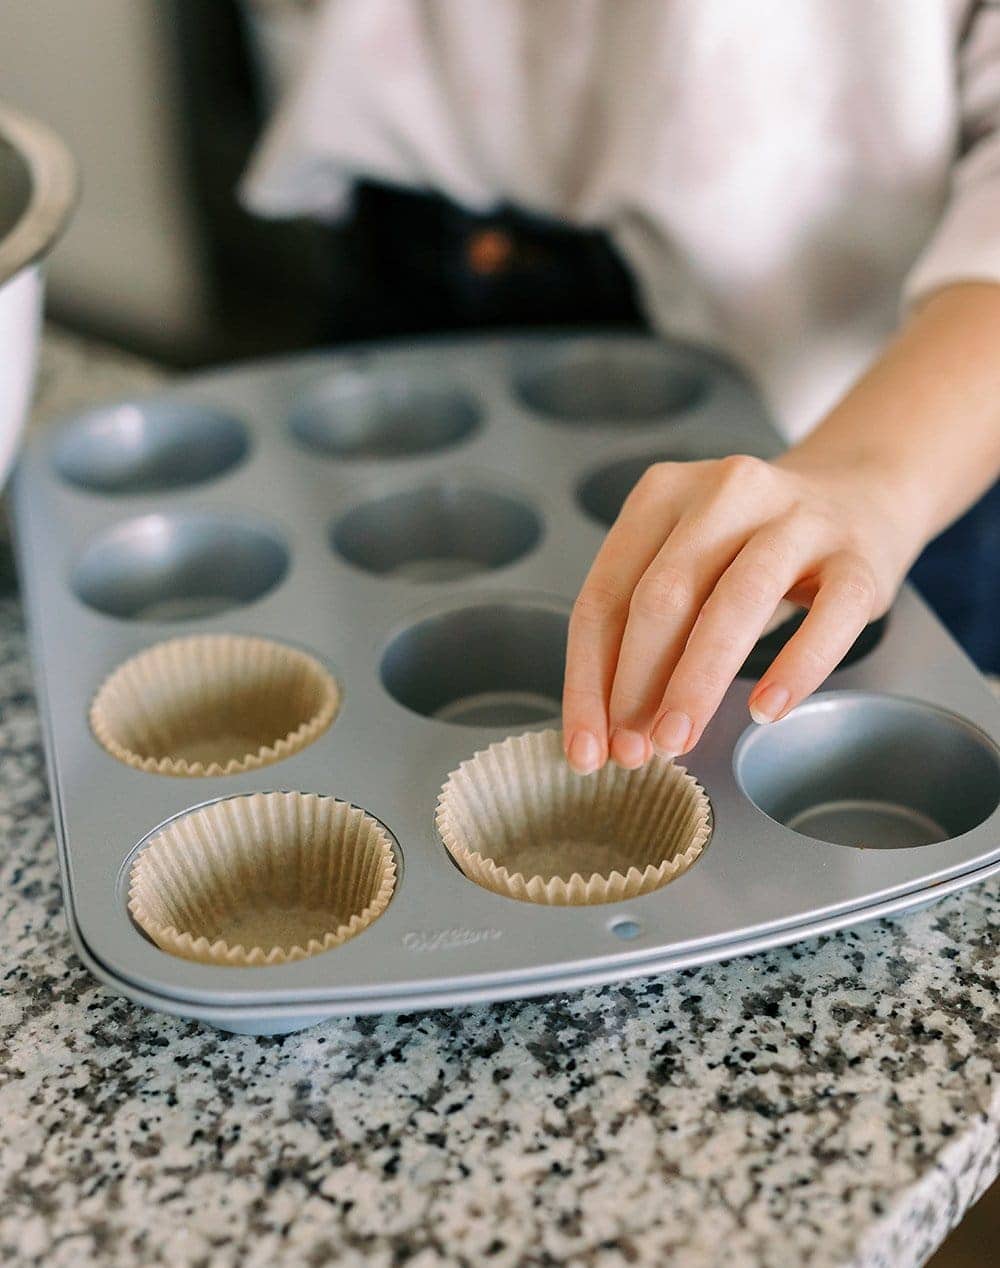 cupcake liners being placed in cupcake tin to bake cupcakes